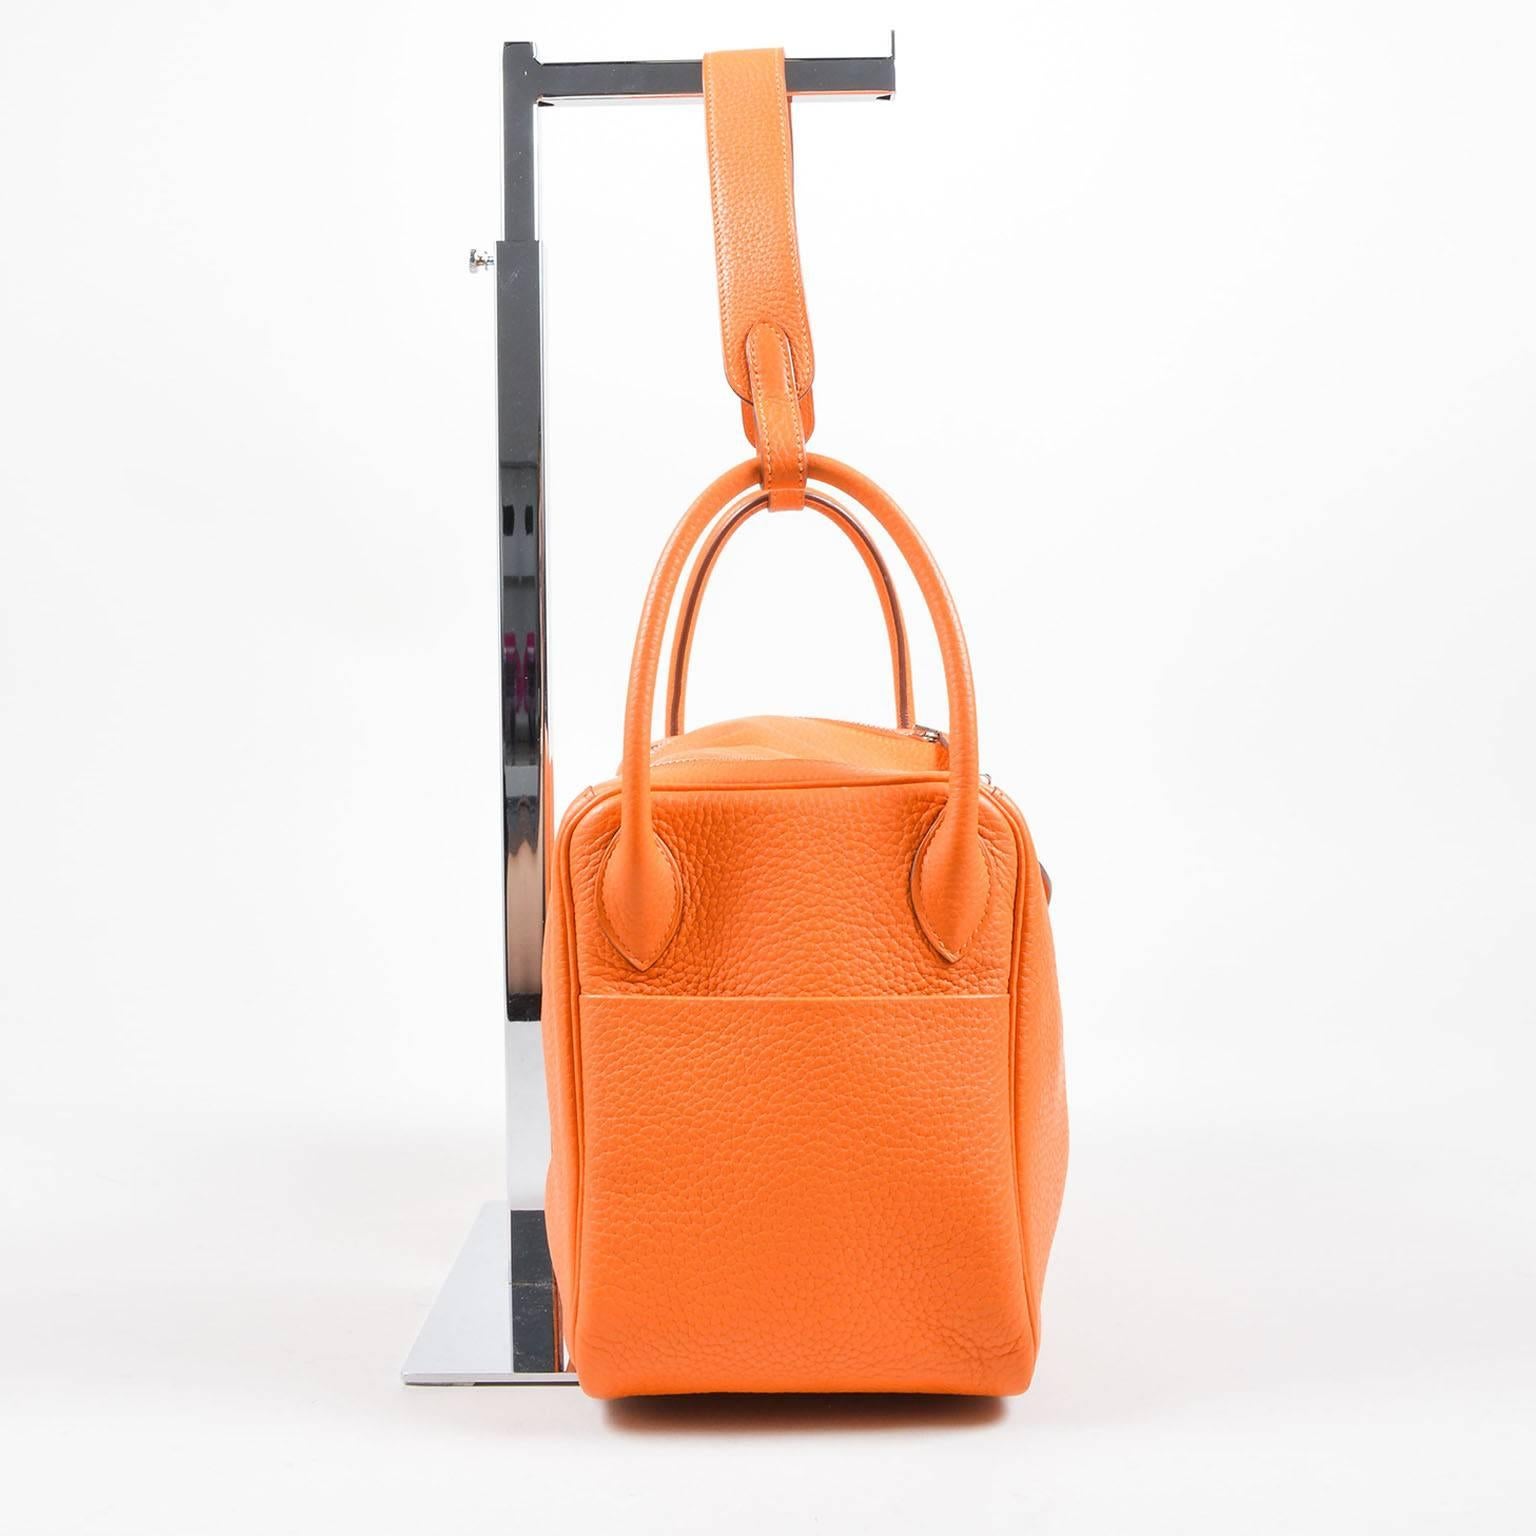 Hermes Fire Orange Taurillon Clemence Calfskin Leather 30cm Lindy Handbag In Excellent Condition For Sale In Chicago, IL